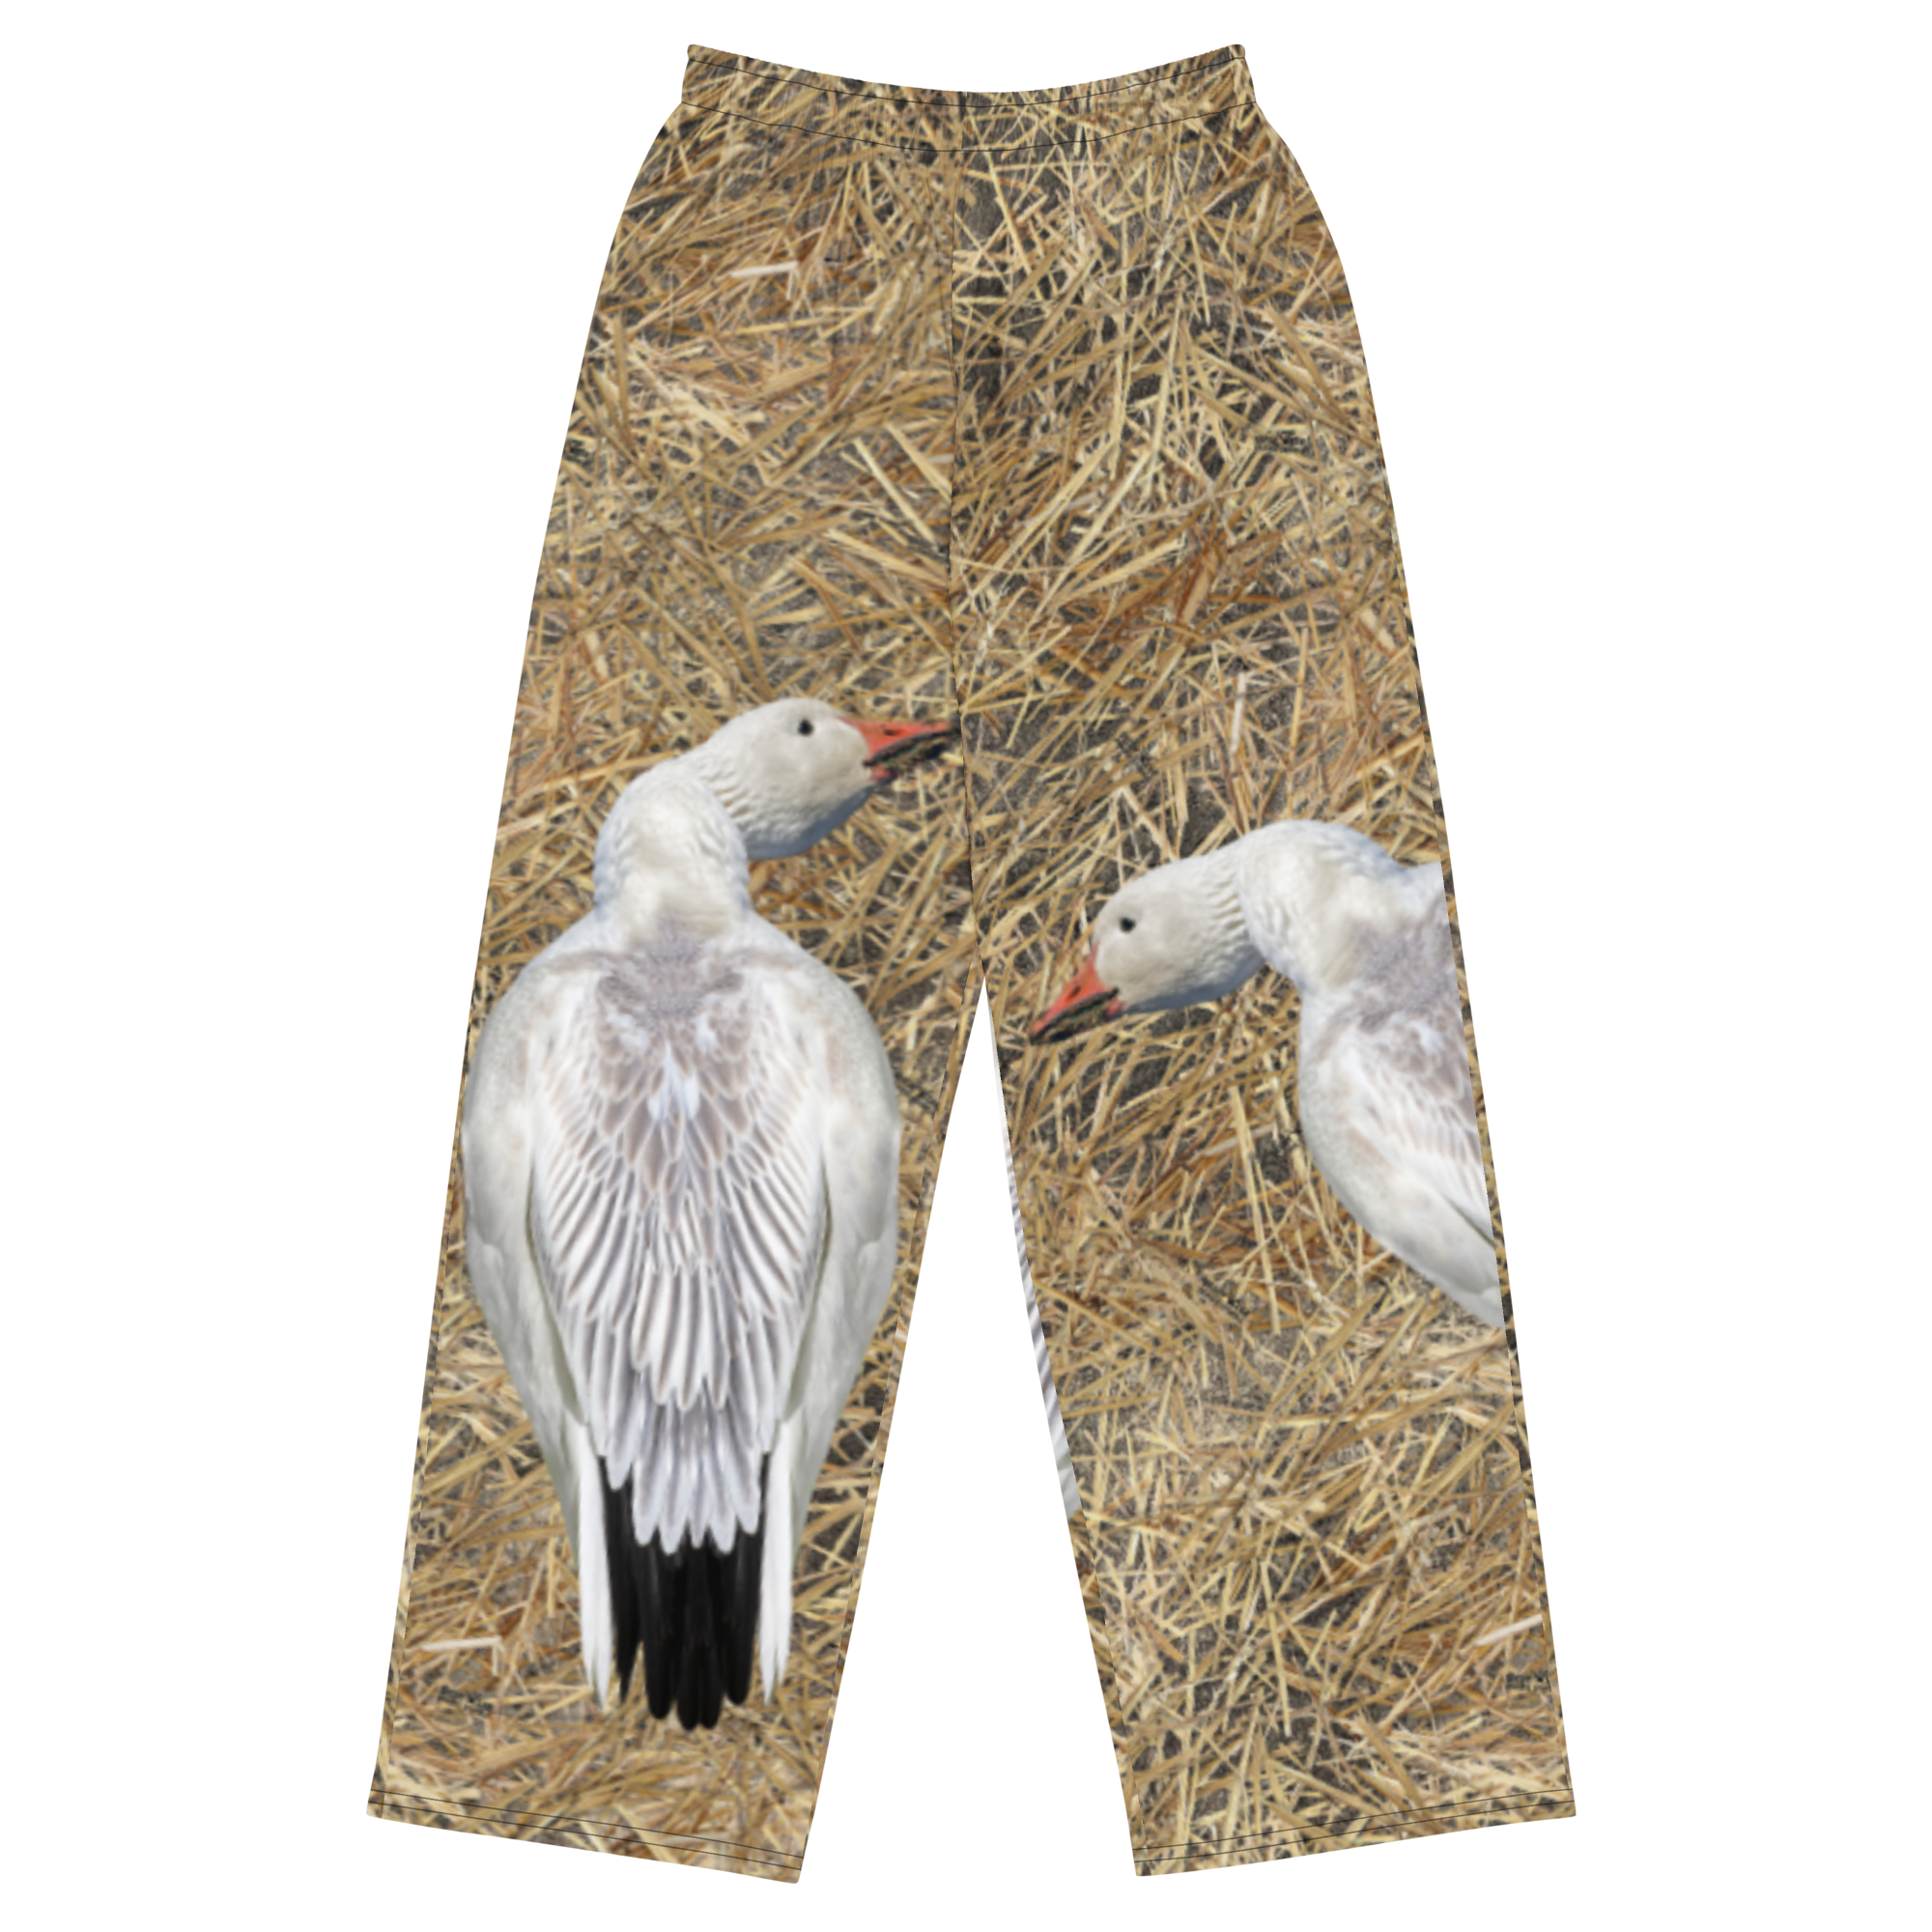 Pants Full Cover 1 – Snow Goose on Prairie Stubble – Decoy Wear by